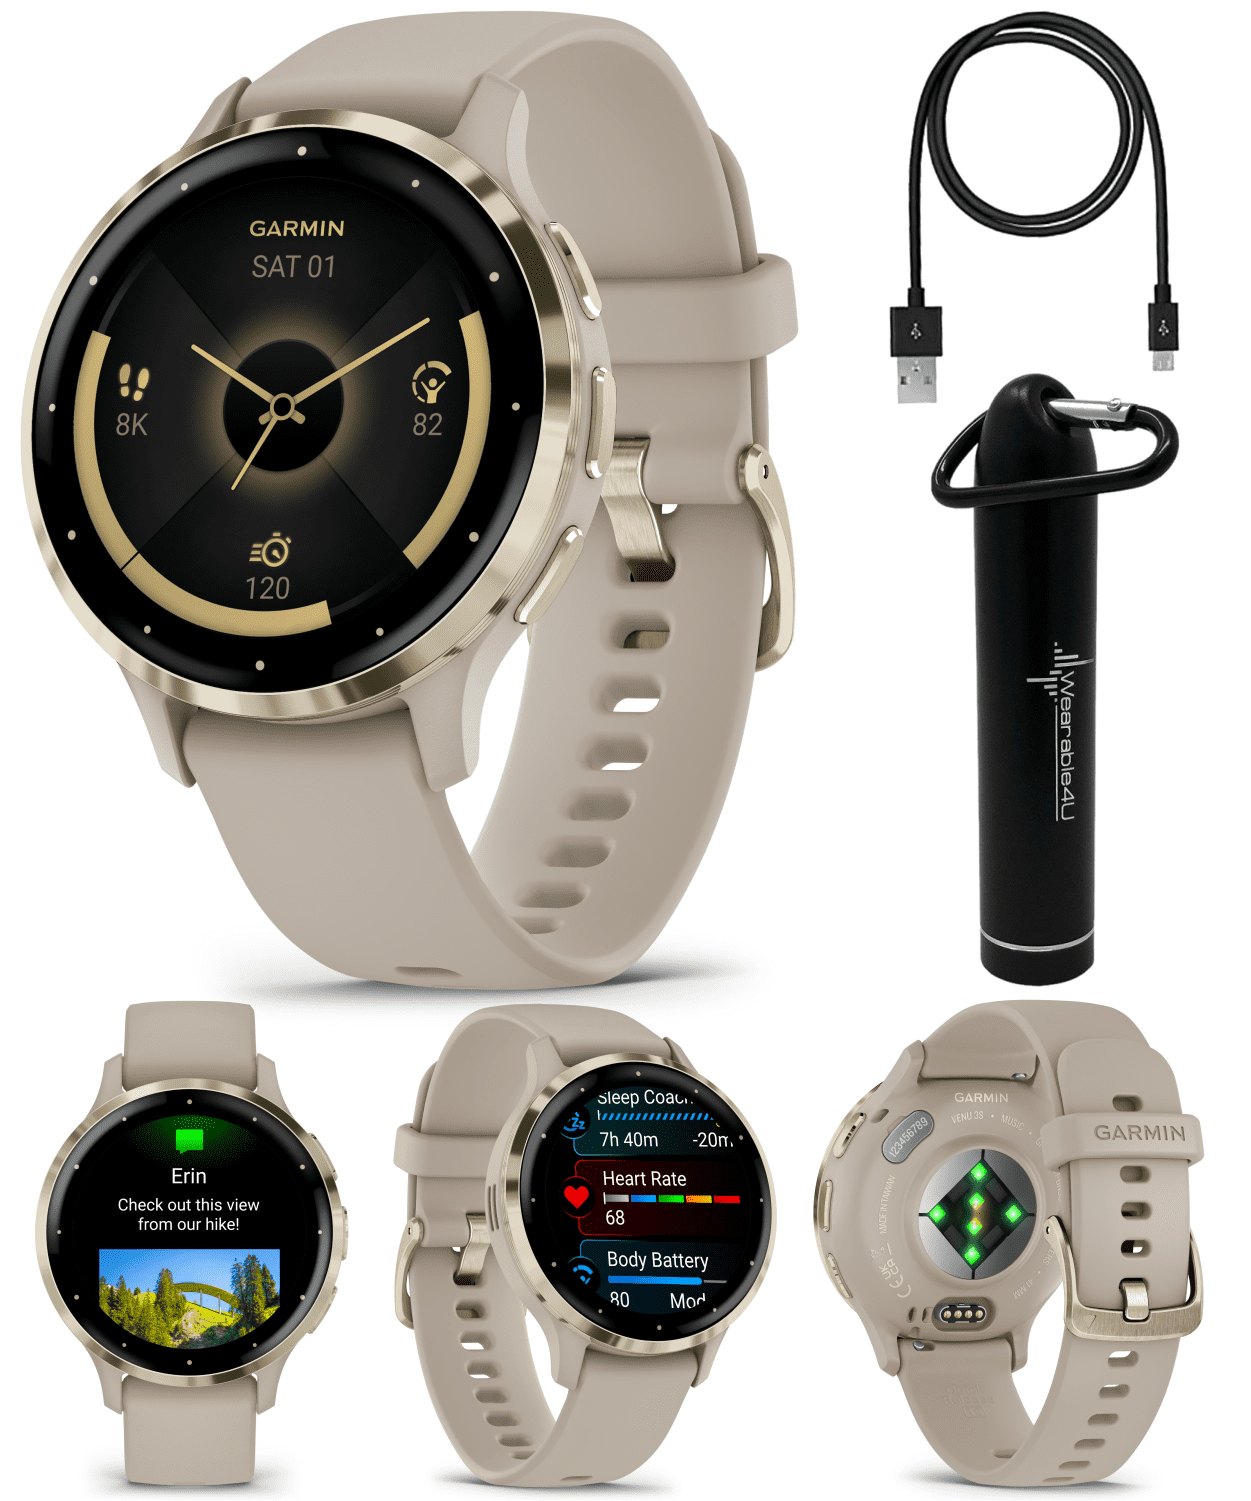  Garmin Venu 3 GPS Smartwatch AMOLED Display 45 mm Watch,  Advanced Health and Fitness Features, Up to 14 Days of Battery, Wheelchair  Mode, Sleep Coach, Black with Wearable4U Black Earbuds Bundle : Electronics